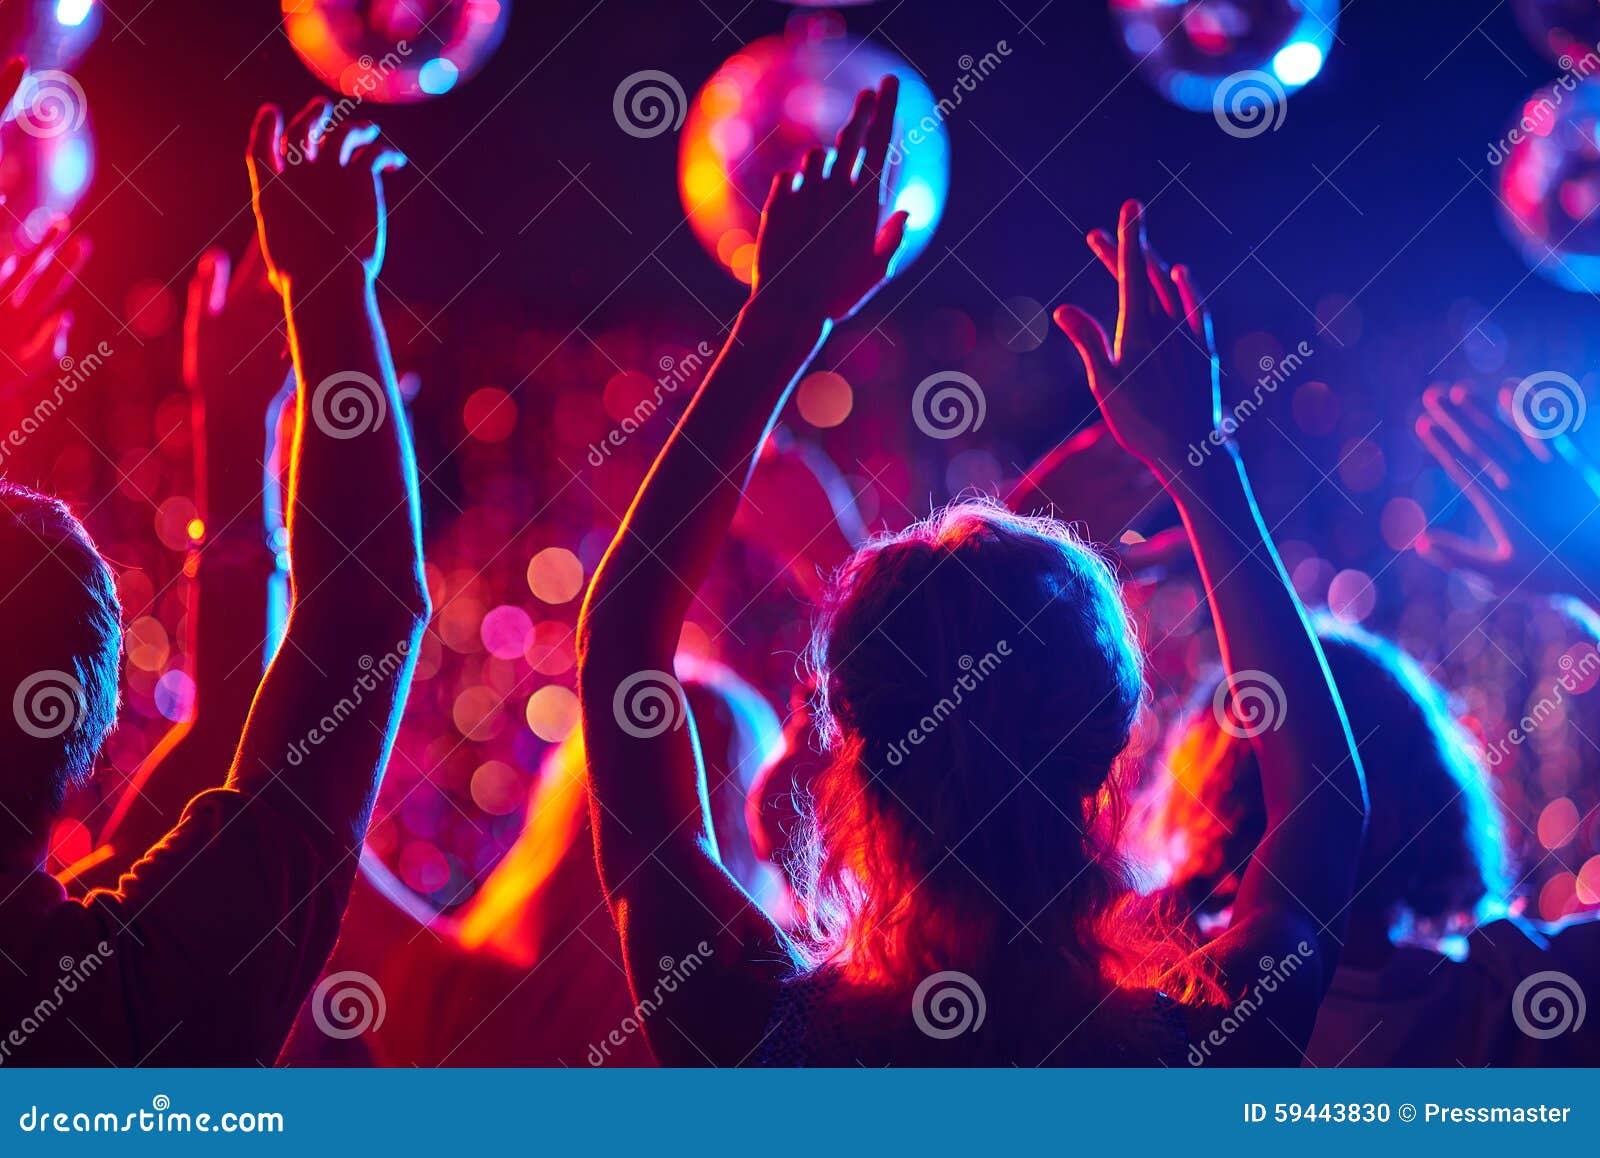 Dancing party stock photo. Image of adult, friend, enjoy - 59443830